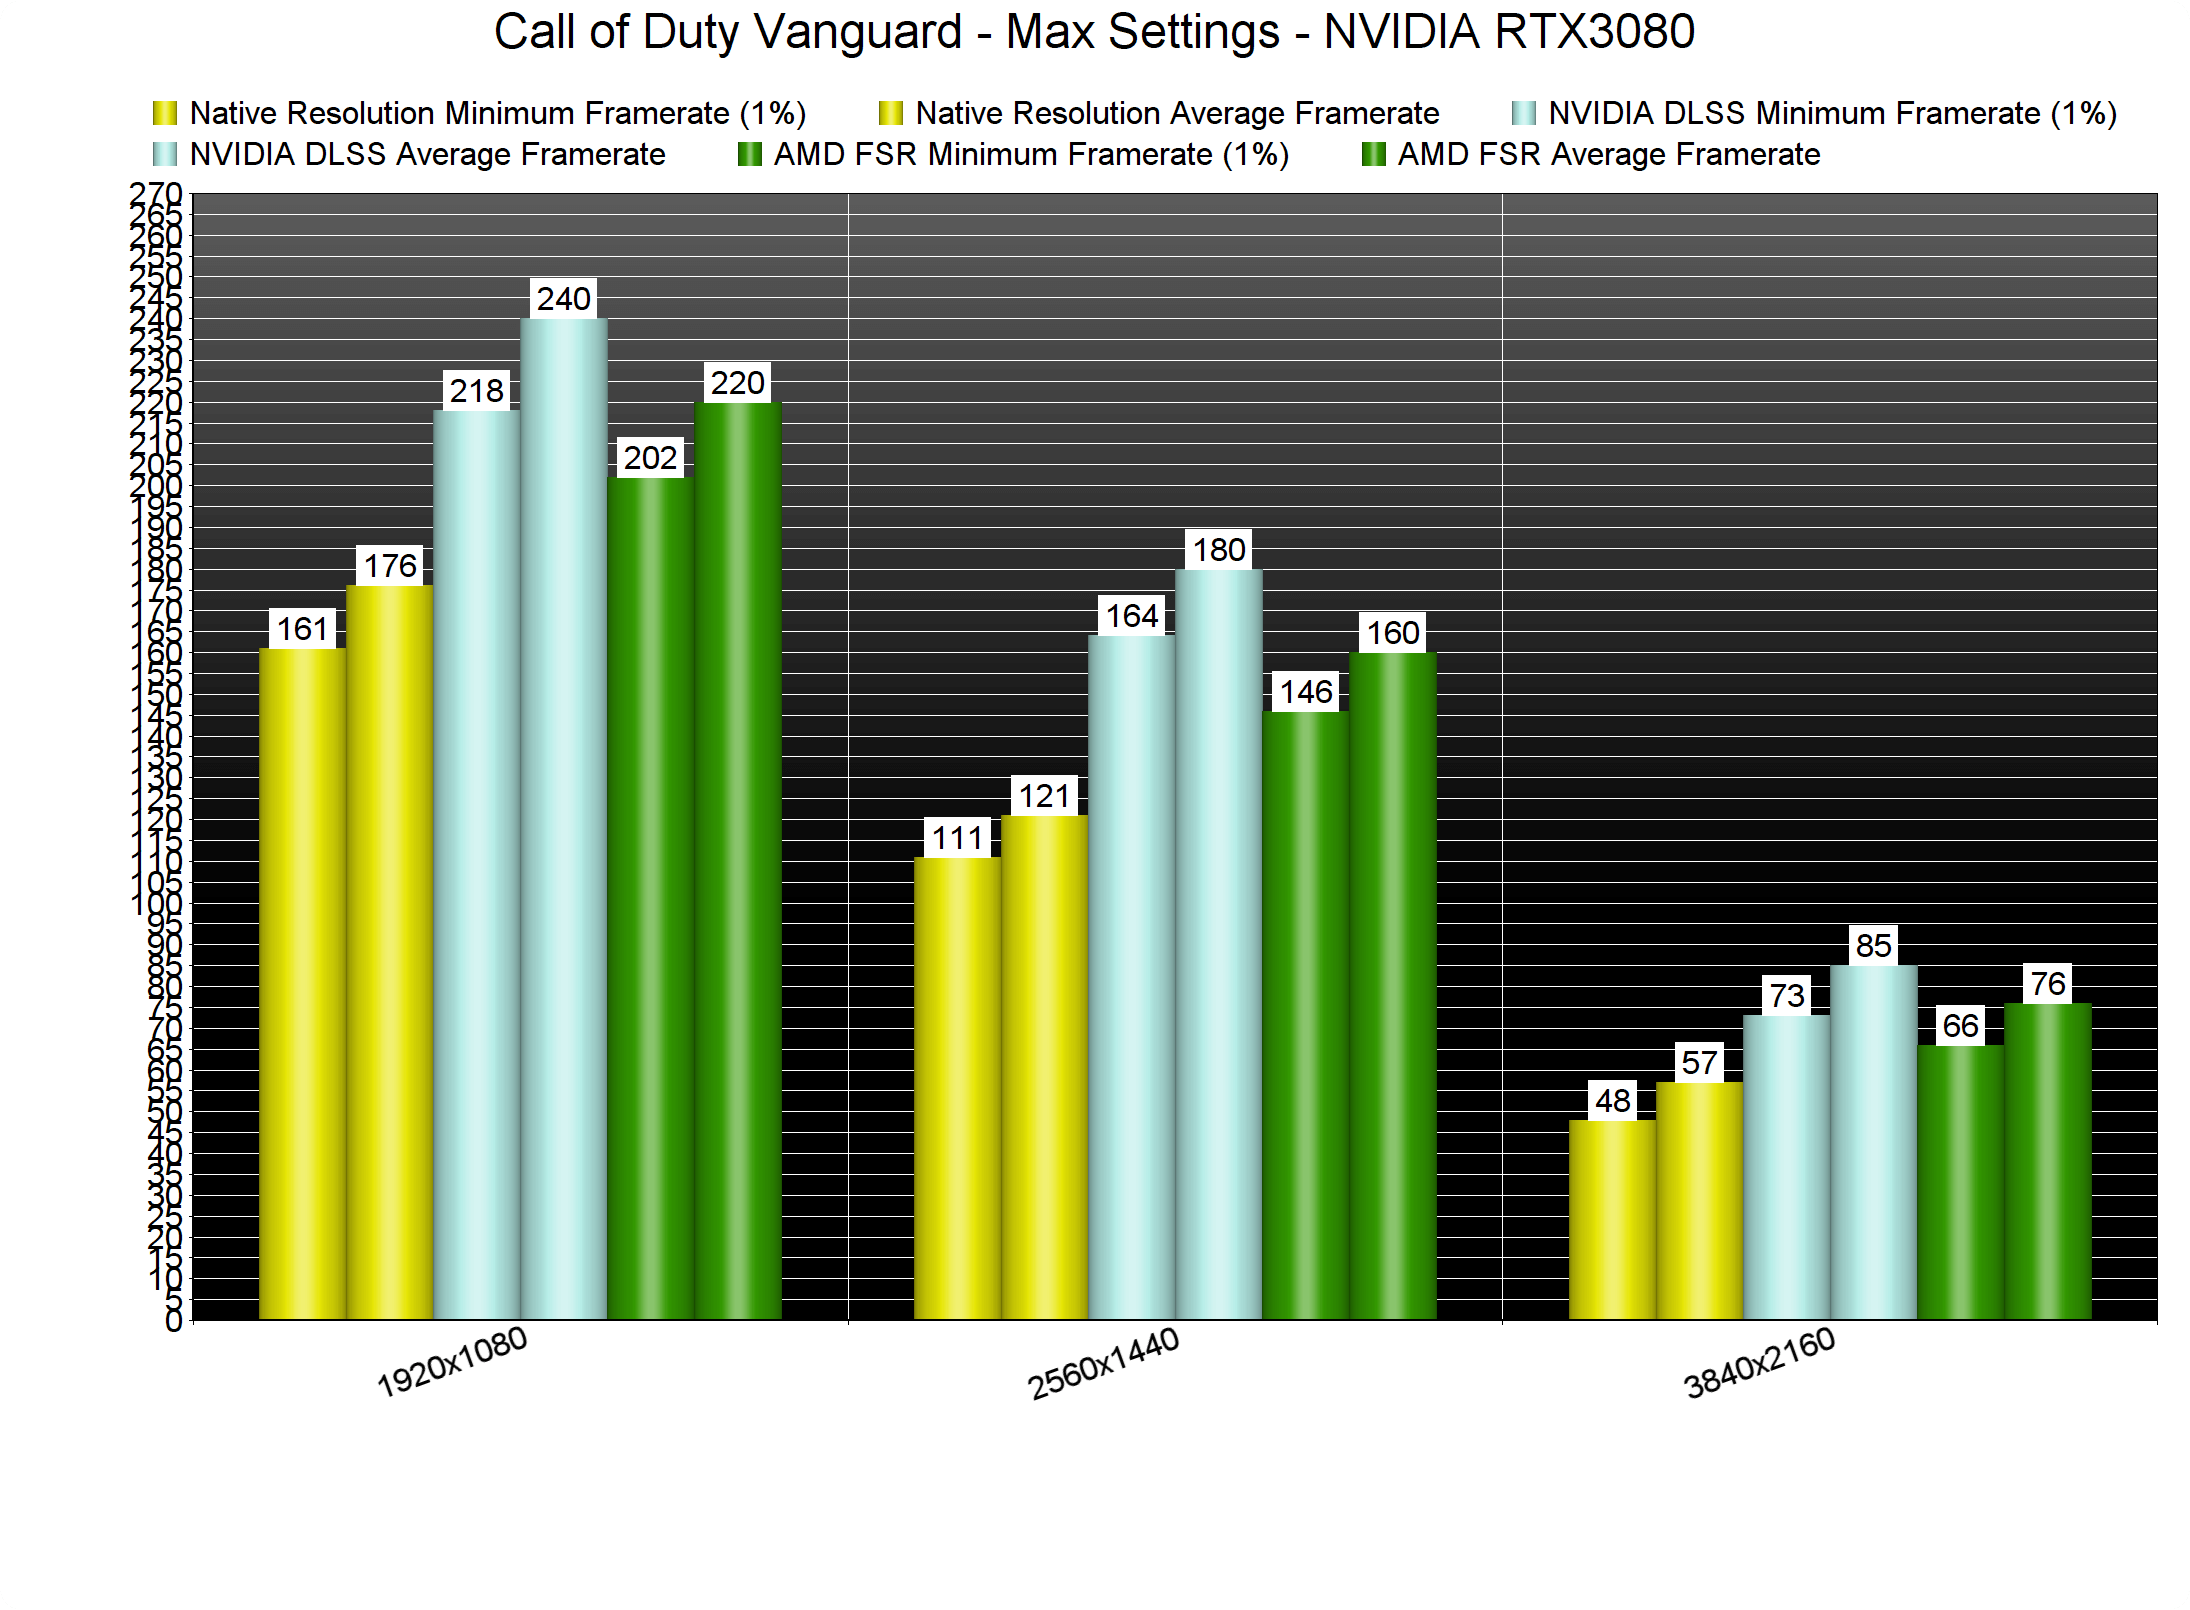 Call of Duty Vanguard - PS5 & PC Performance Review 